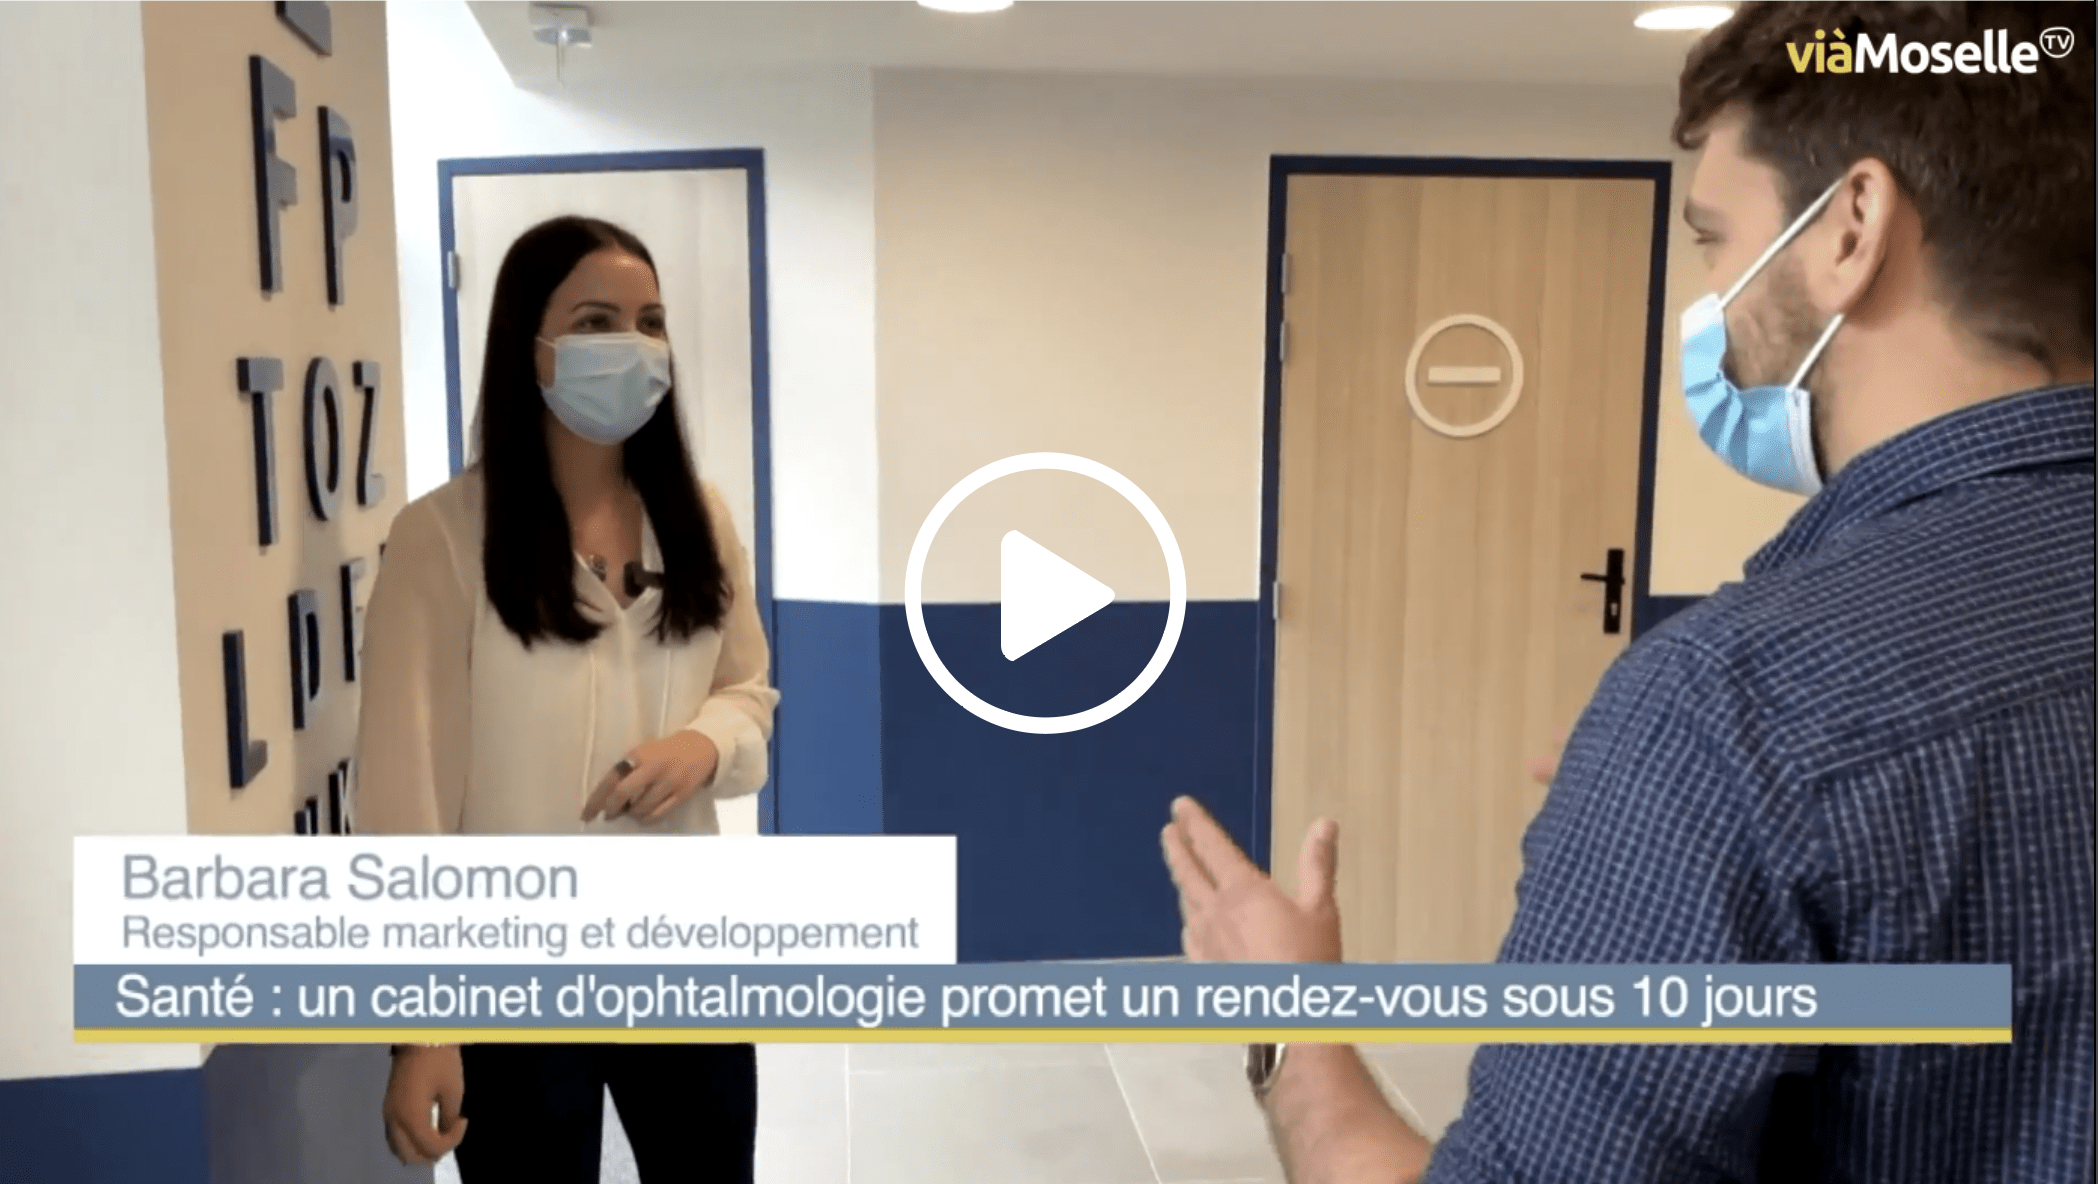 video Moselle info representant Ophtalmologie Express